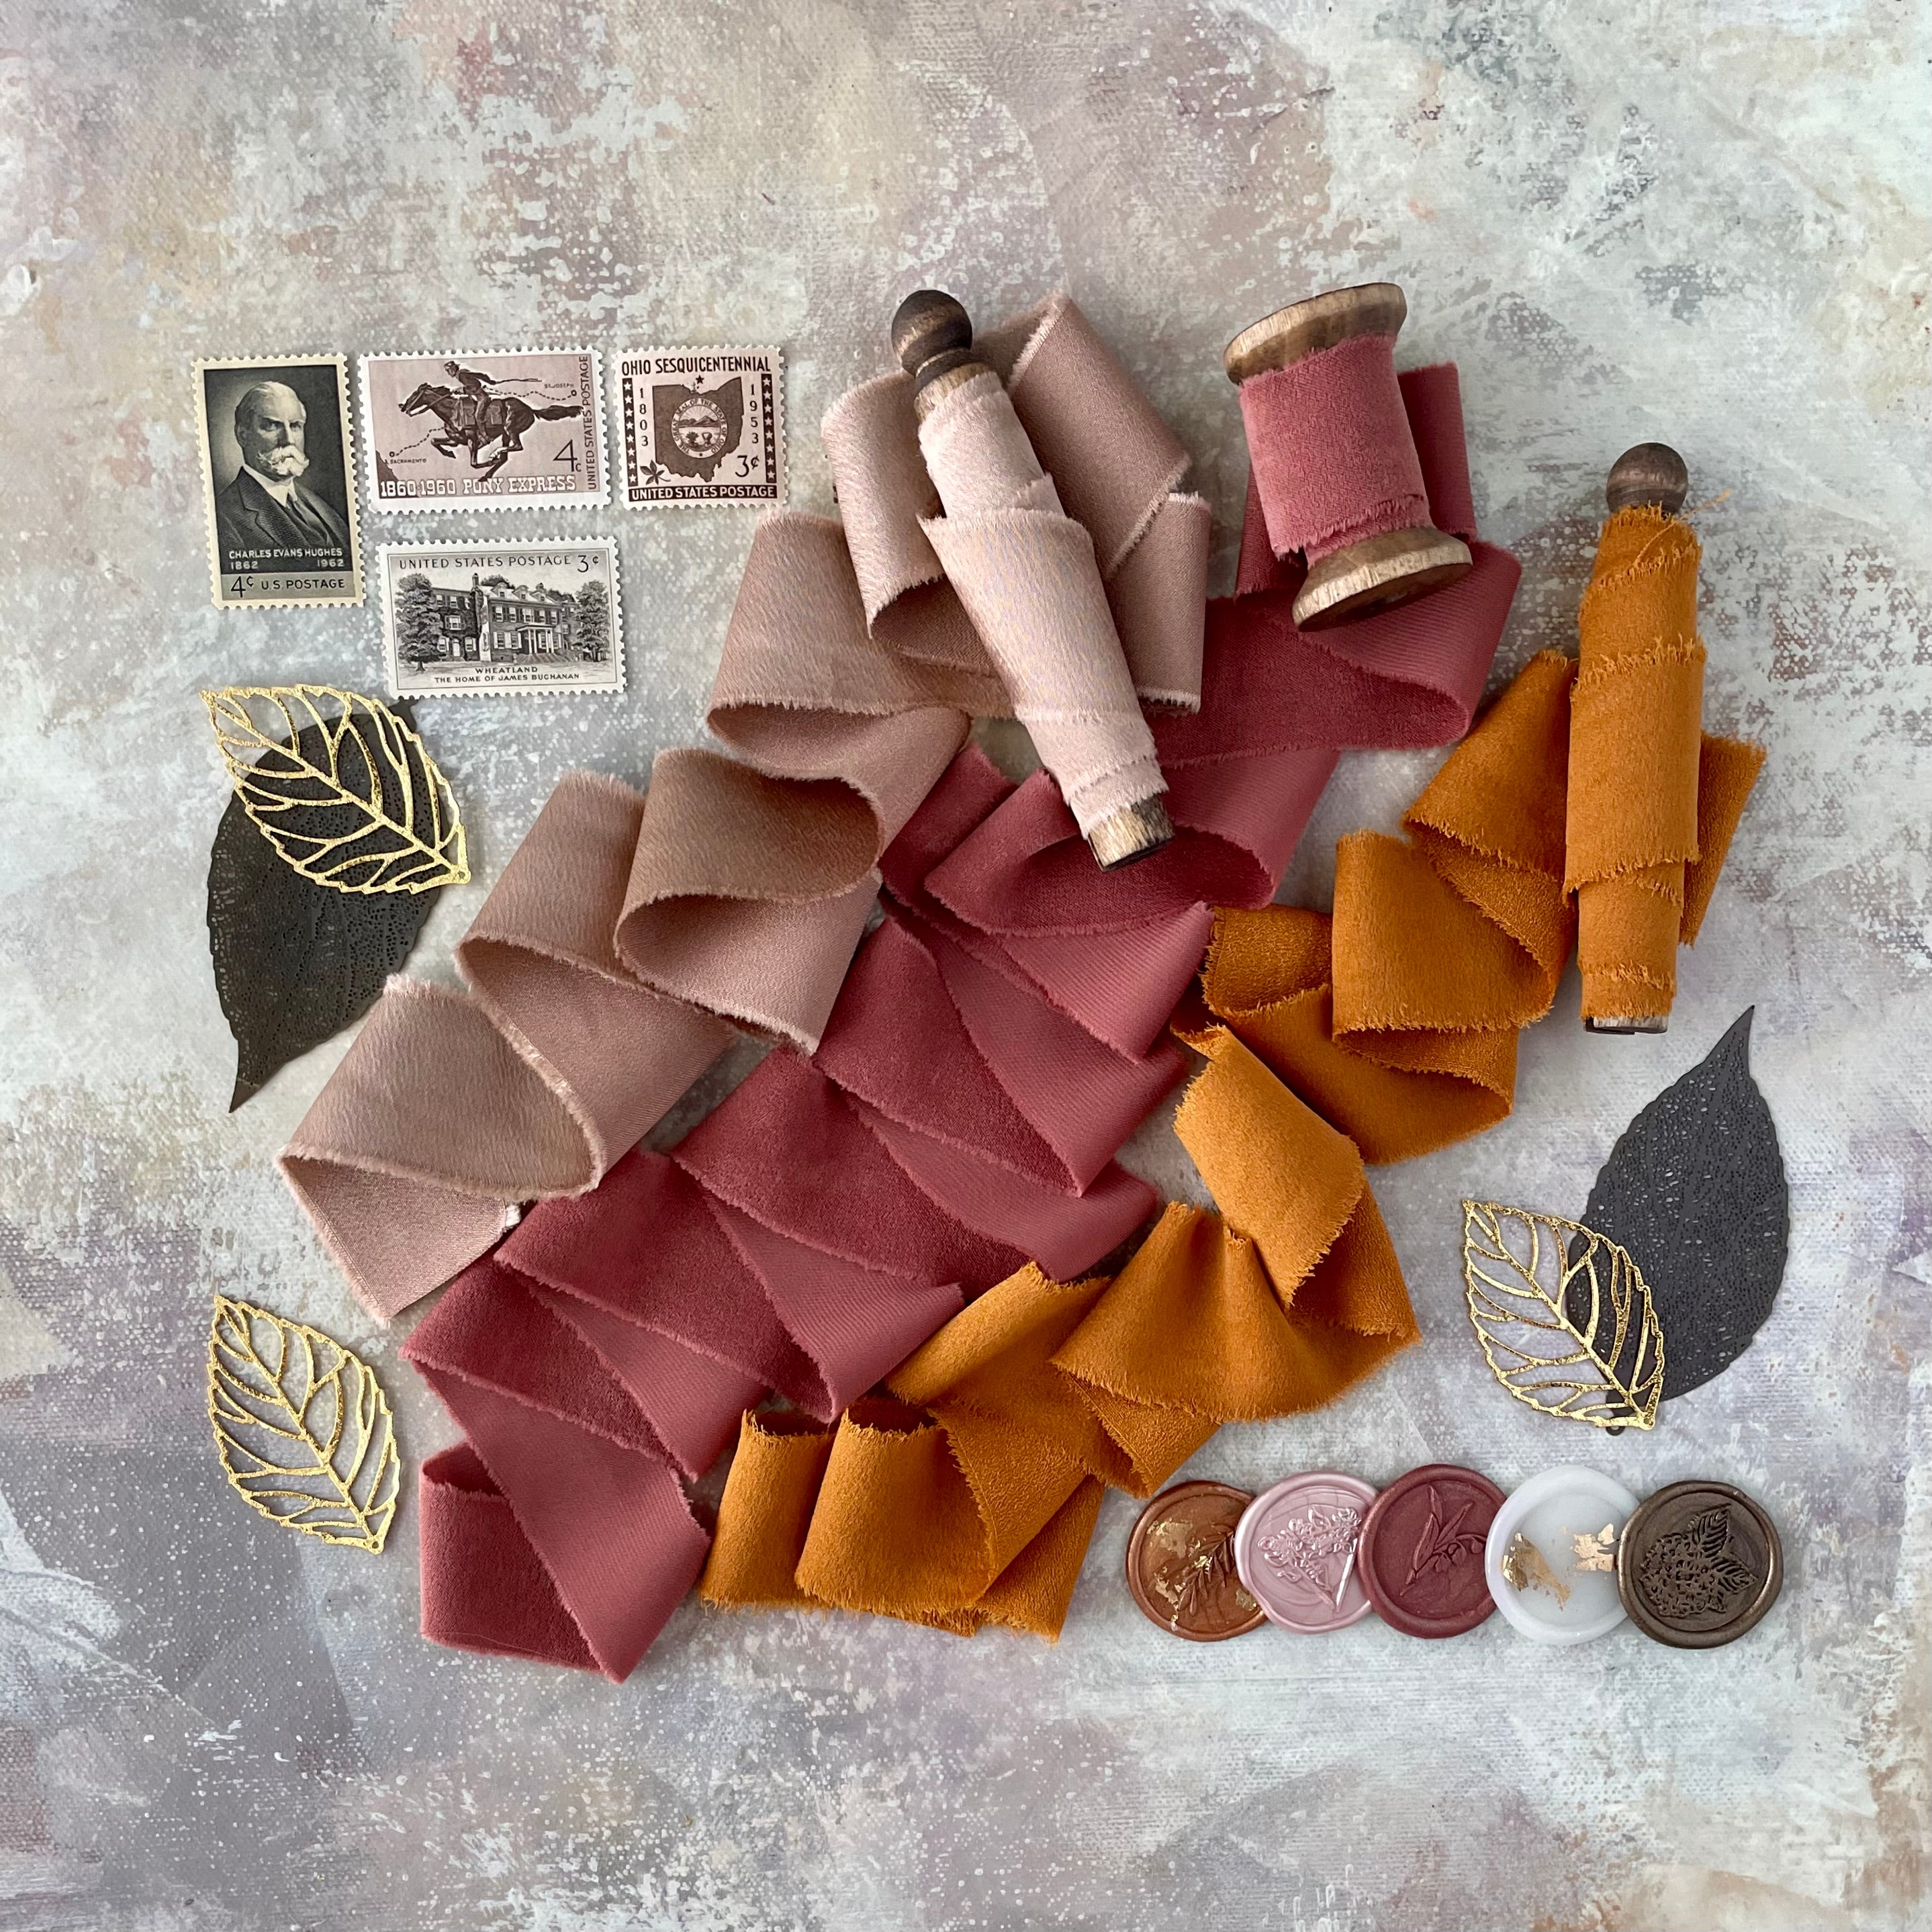 4 vintage stamps, 5 wax seals, 5 metal styling leaves, 3 spools of ribbon - Wedding Flat lay props from Champagne & GRIT